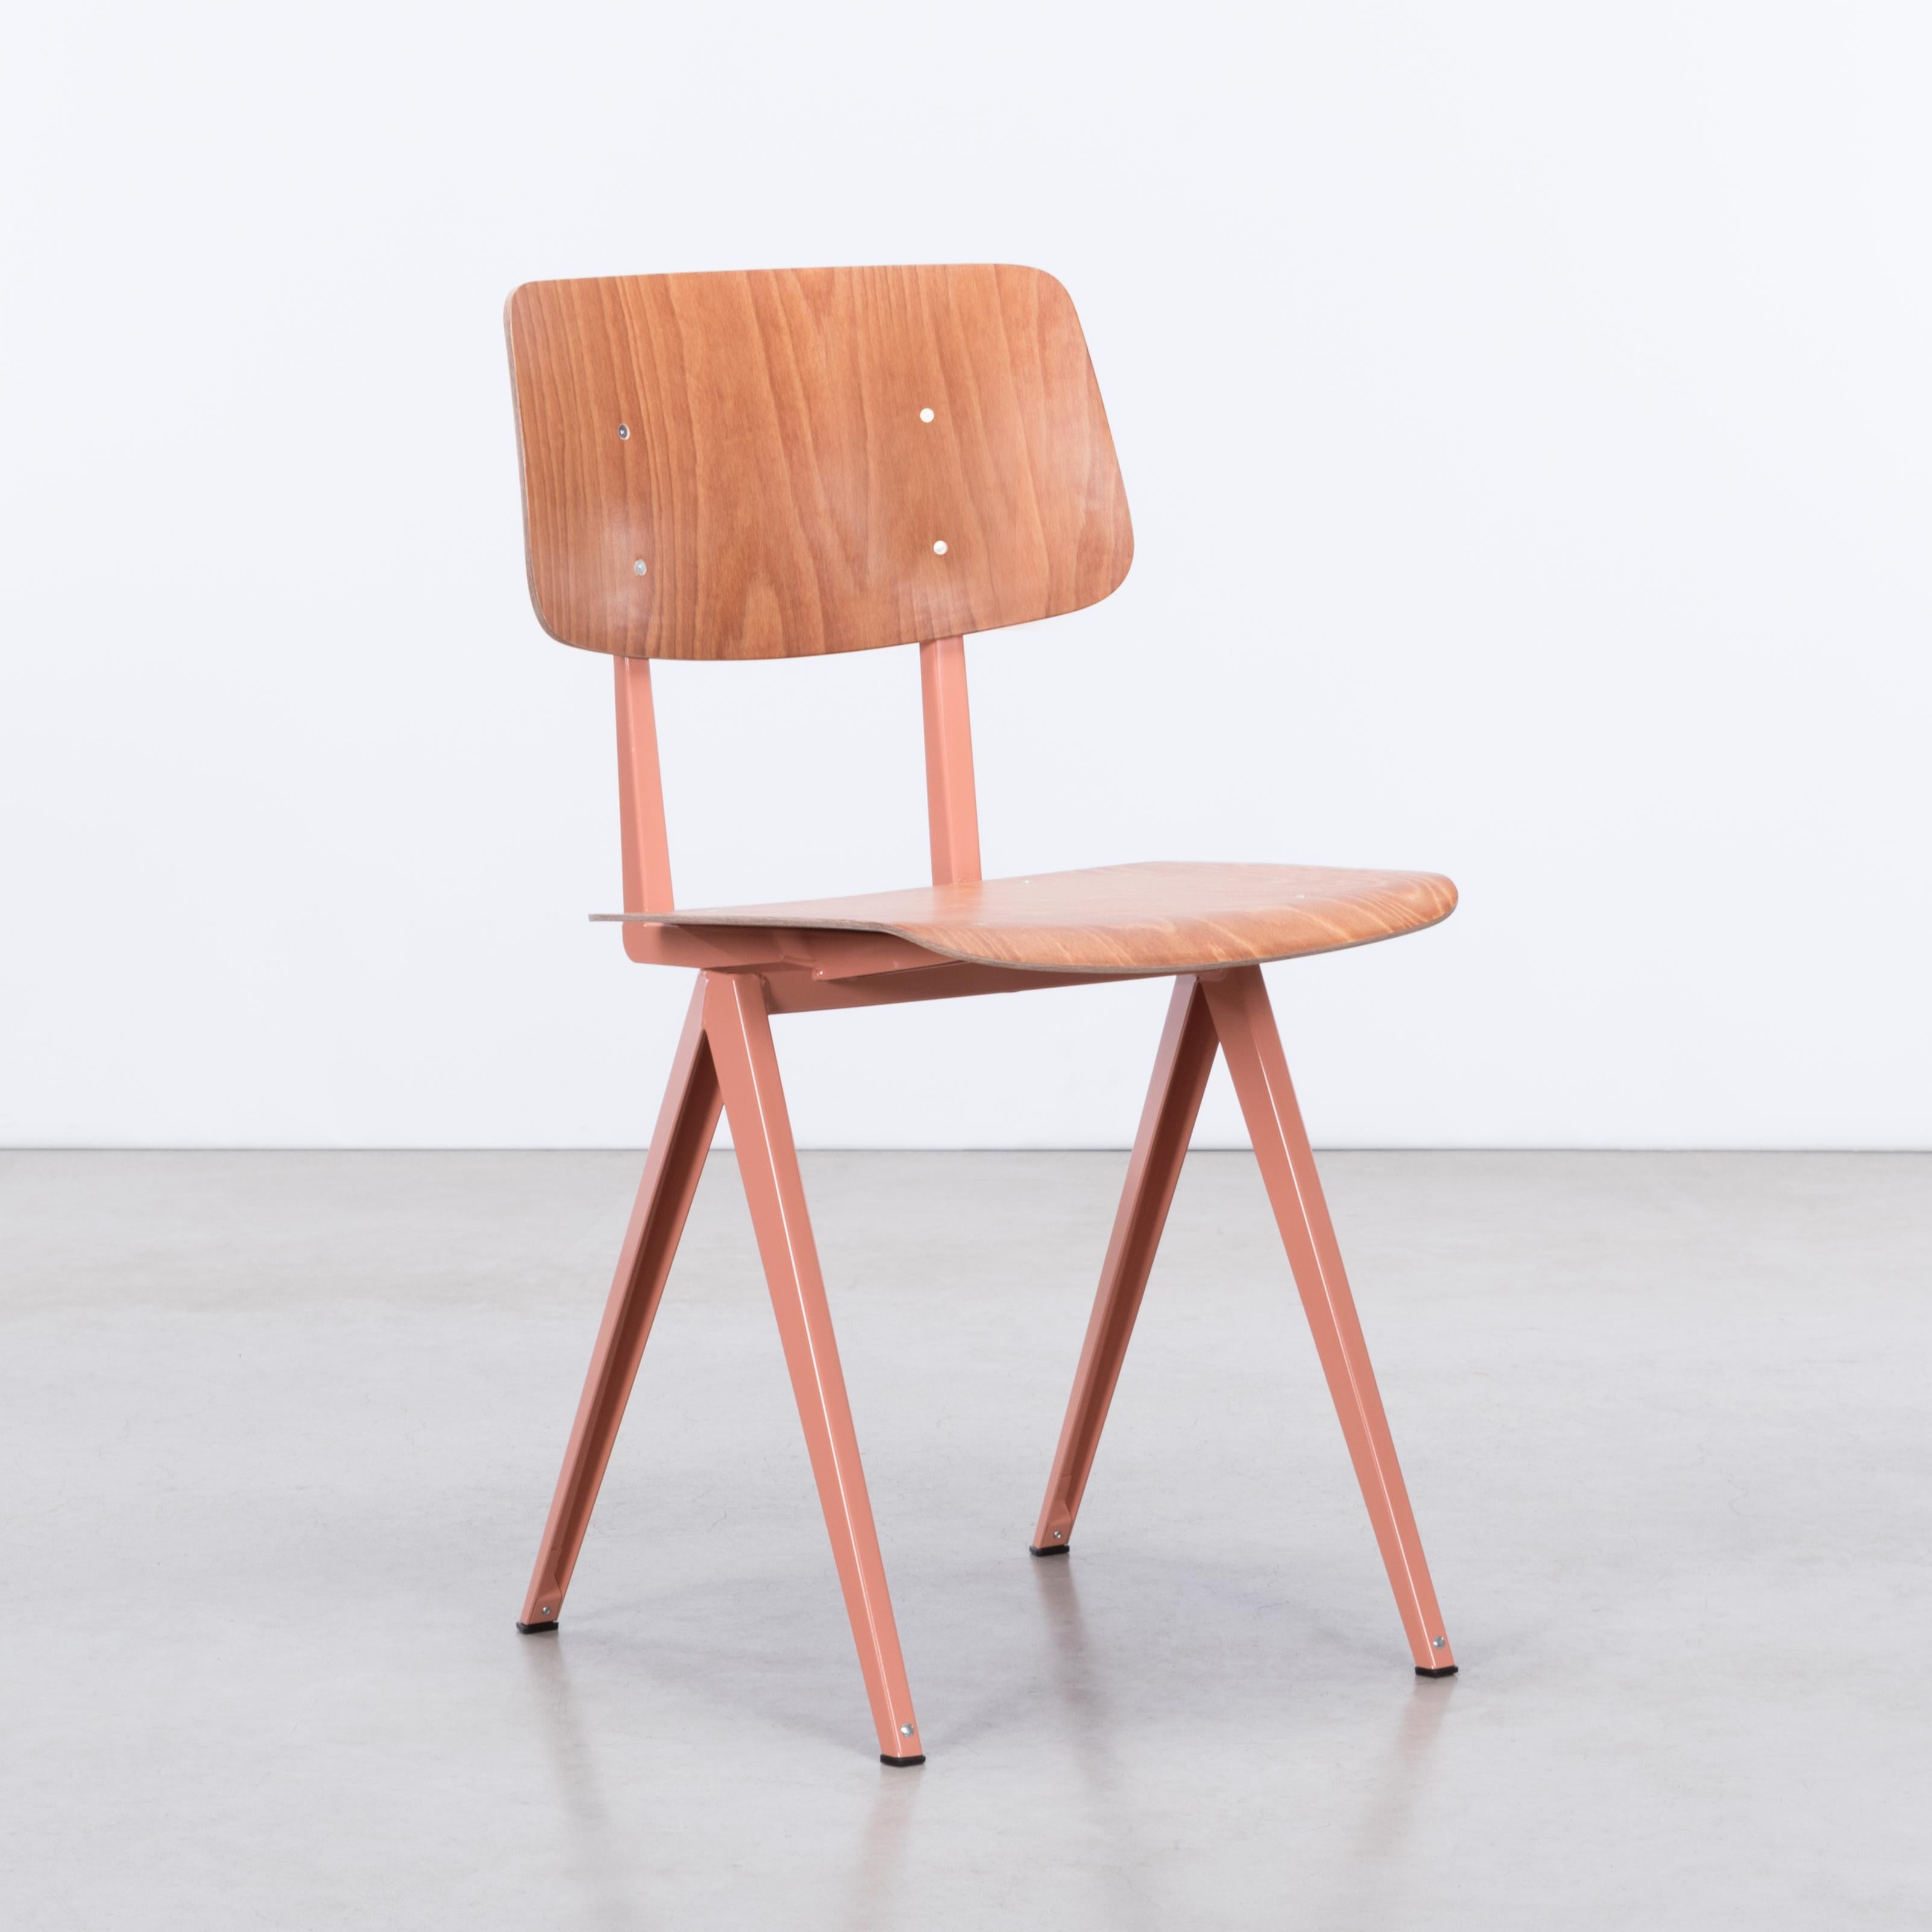 Functional / Industrial Galvanitas S16 plywood chairs in the style of Prouvé. Frames are made of folded sheet steel and seat / backpanel of resin plywood. Various colors, quantities and bespoke service available. In stock and ready to ship worldwide